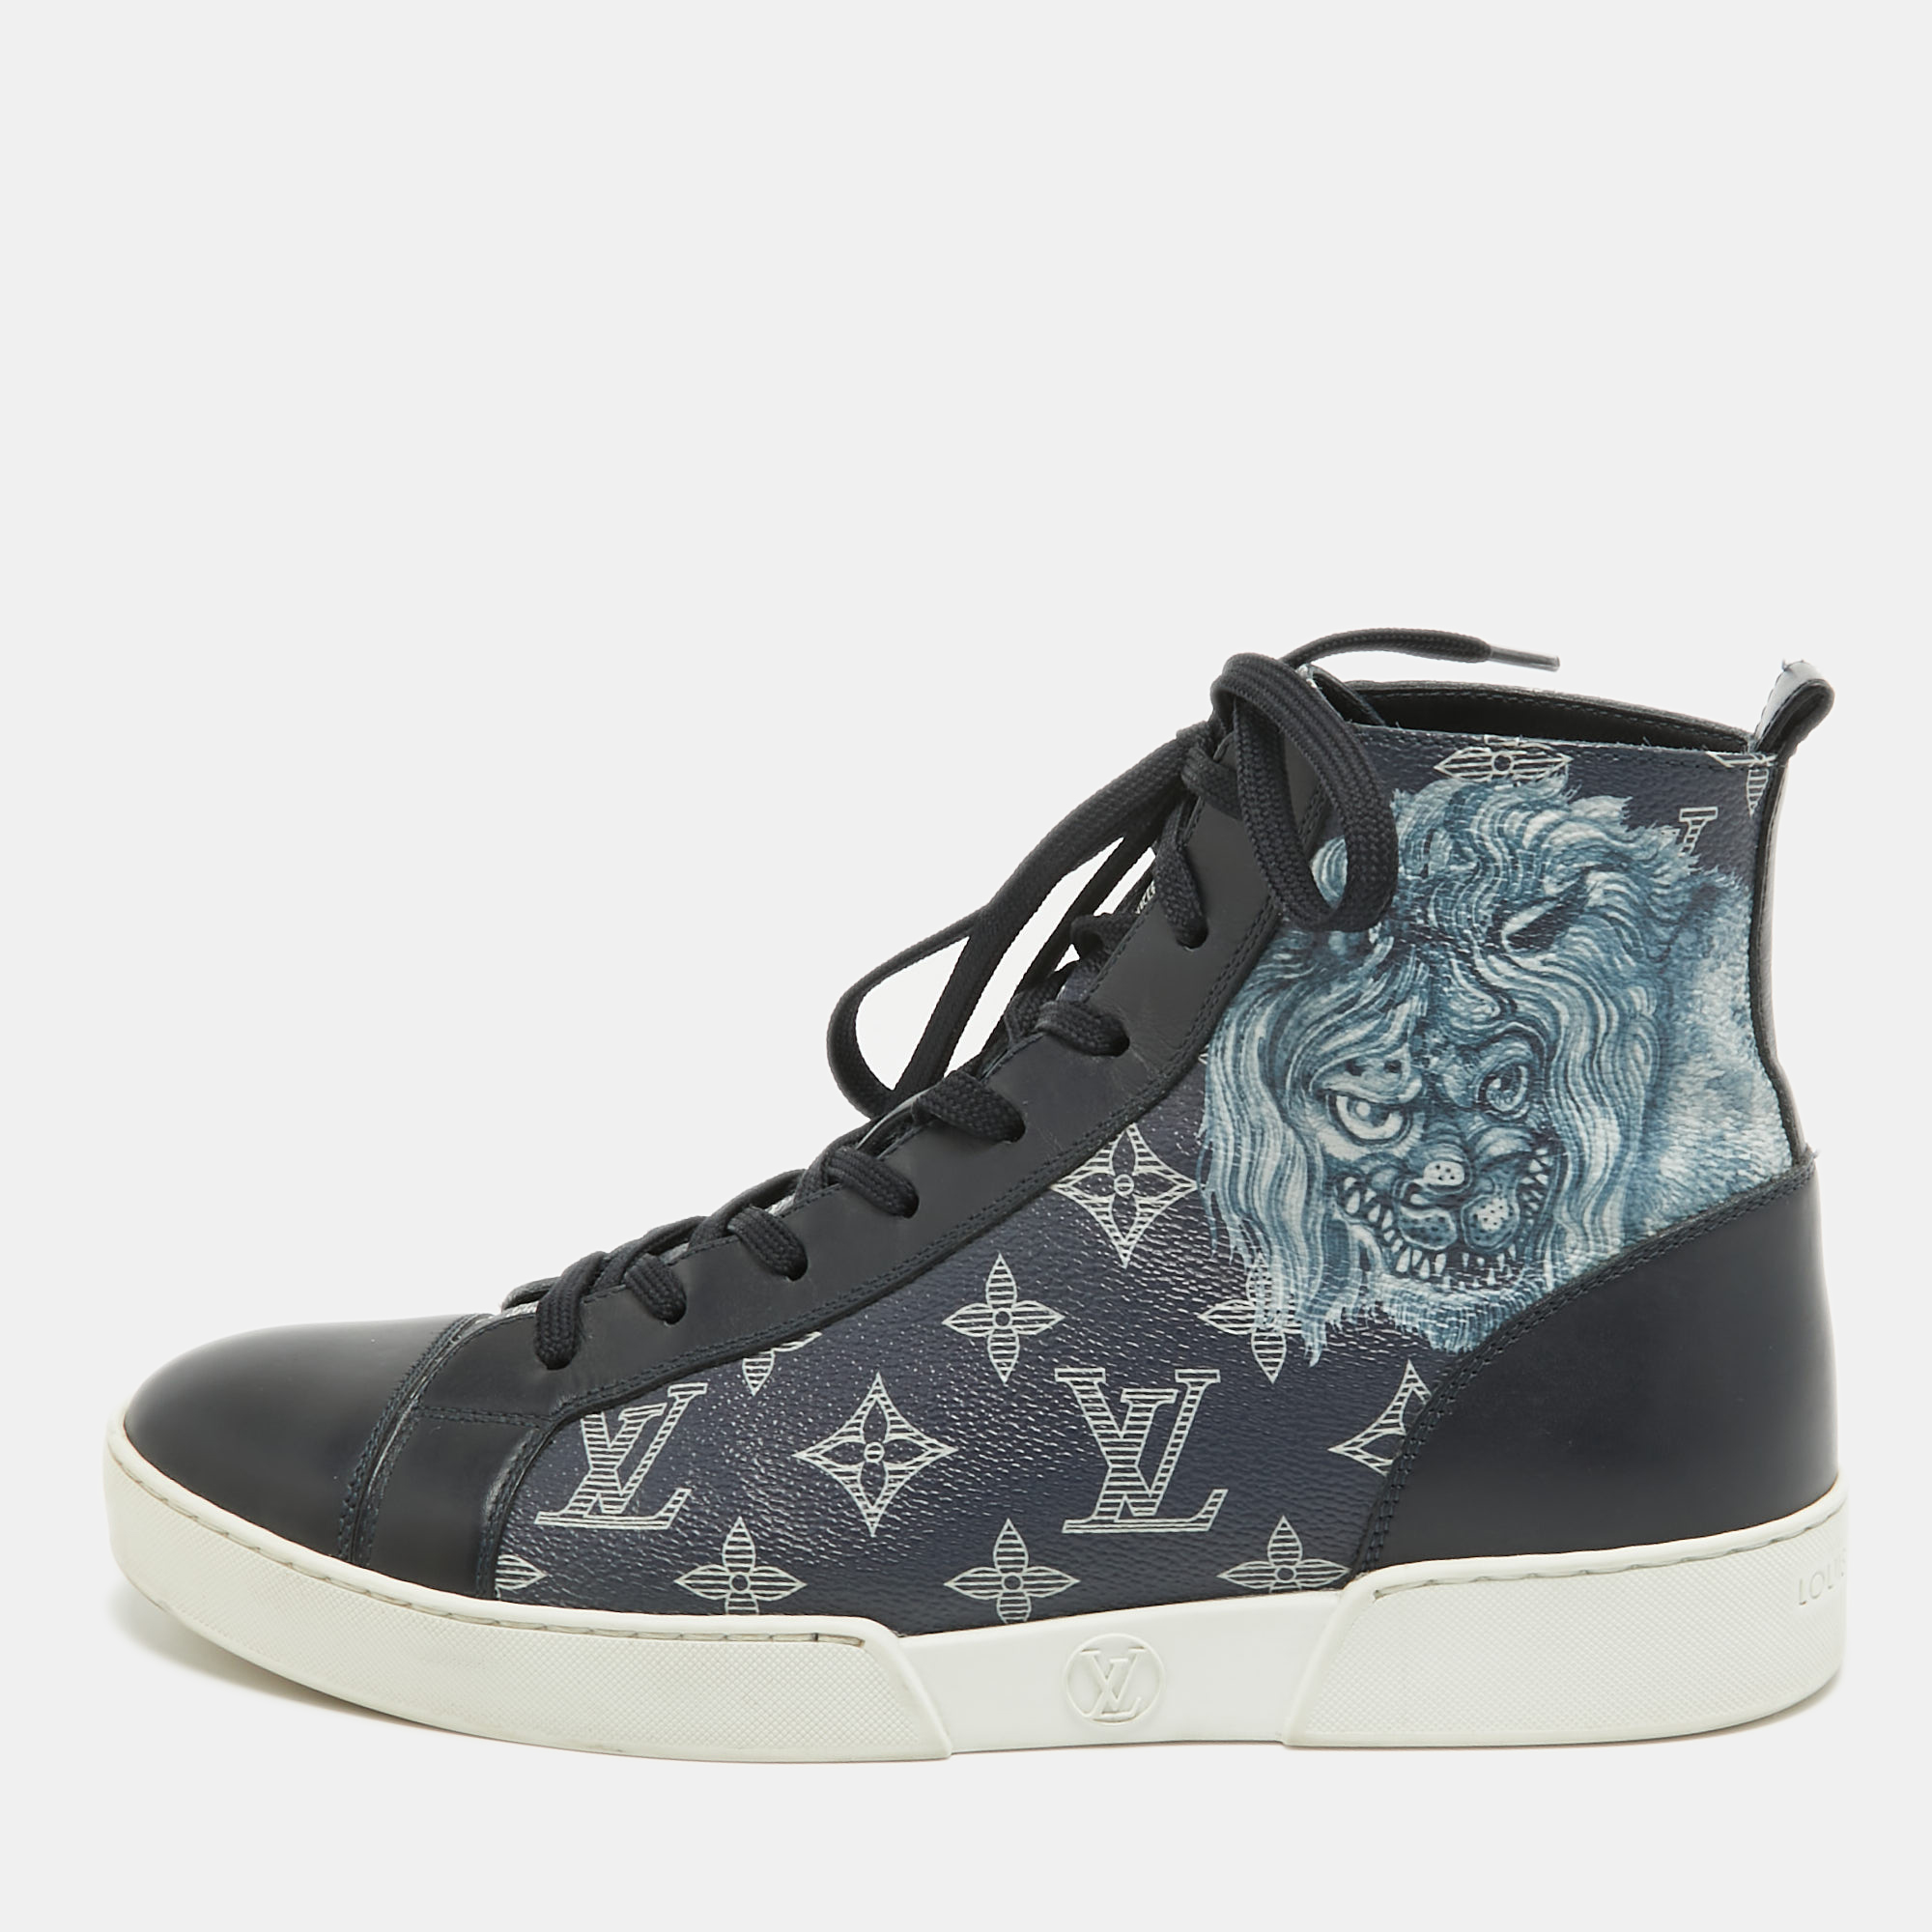 Louis vuitton louise vuitton navy blue canvas and leather match up cloth trainer high top sneakers size 40